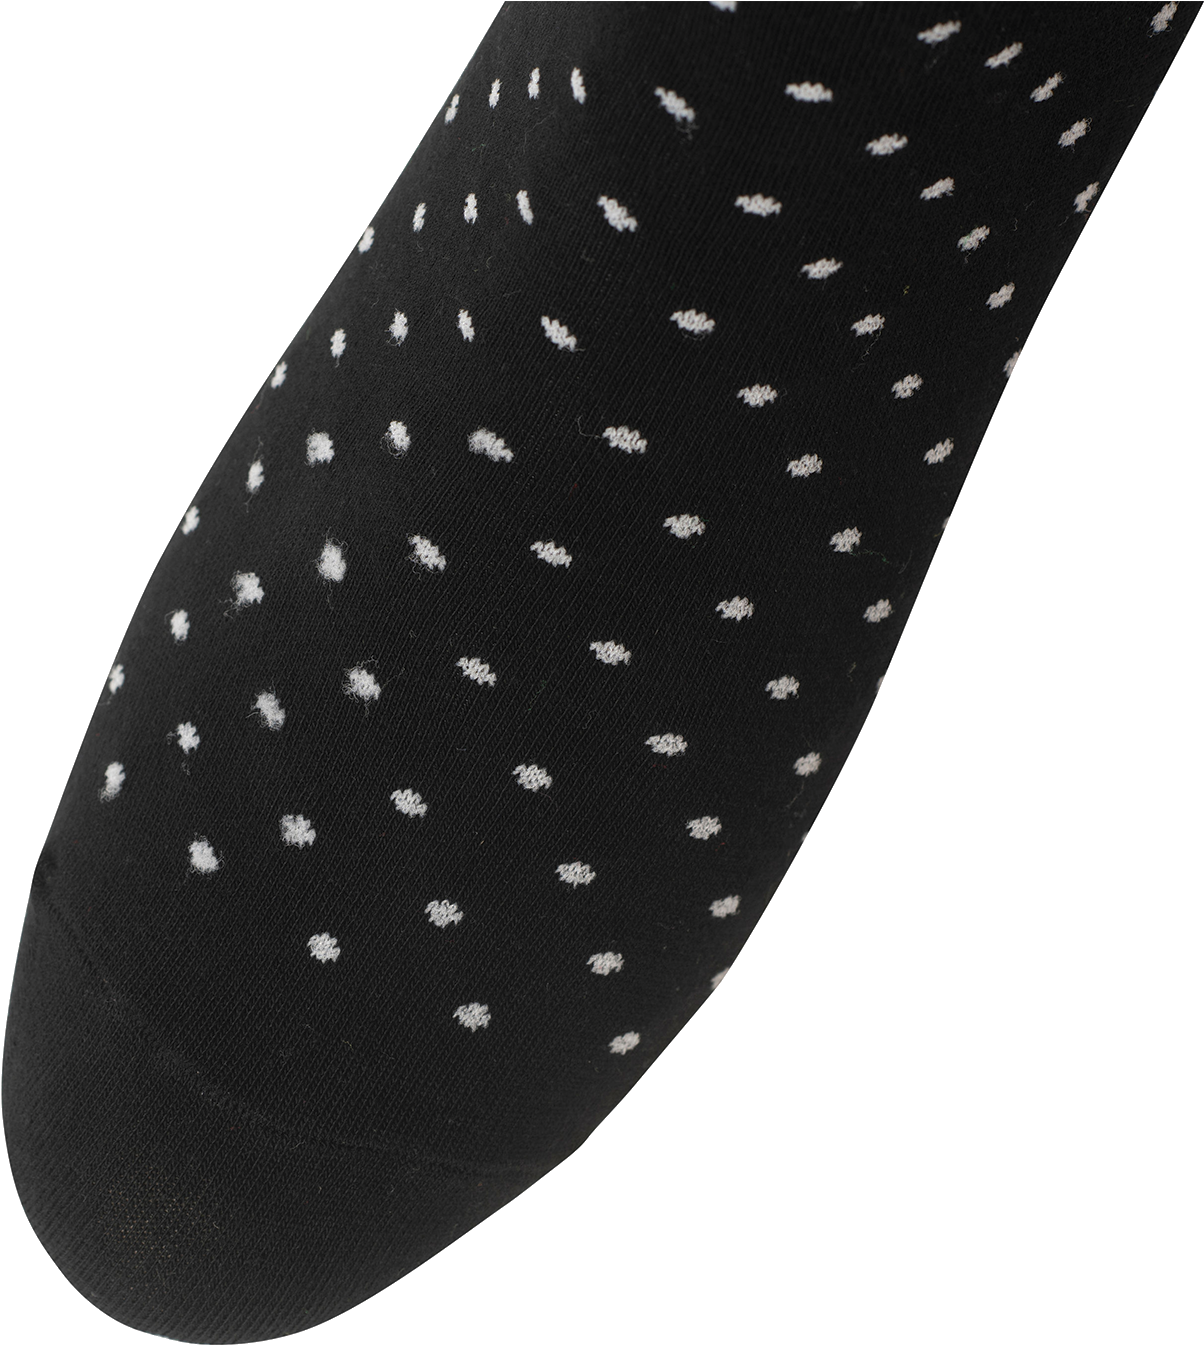 A Black Sock With White Dots